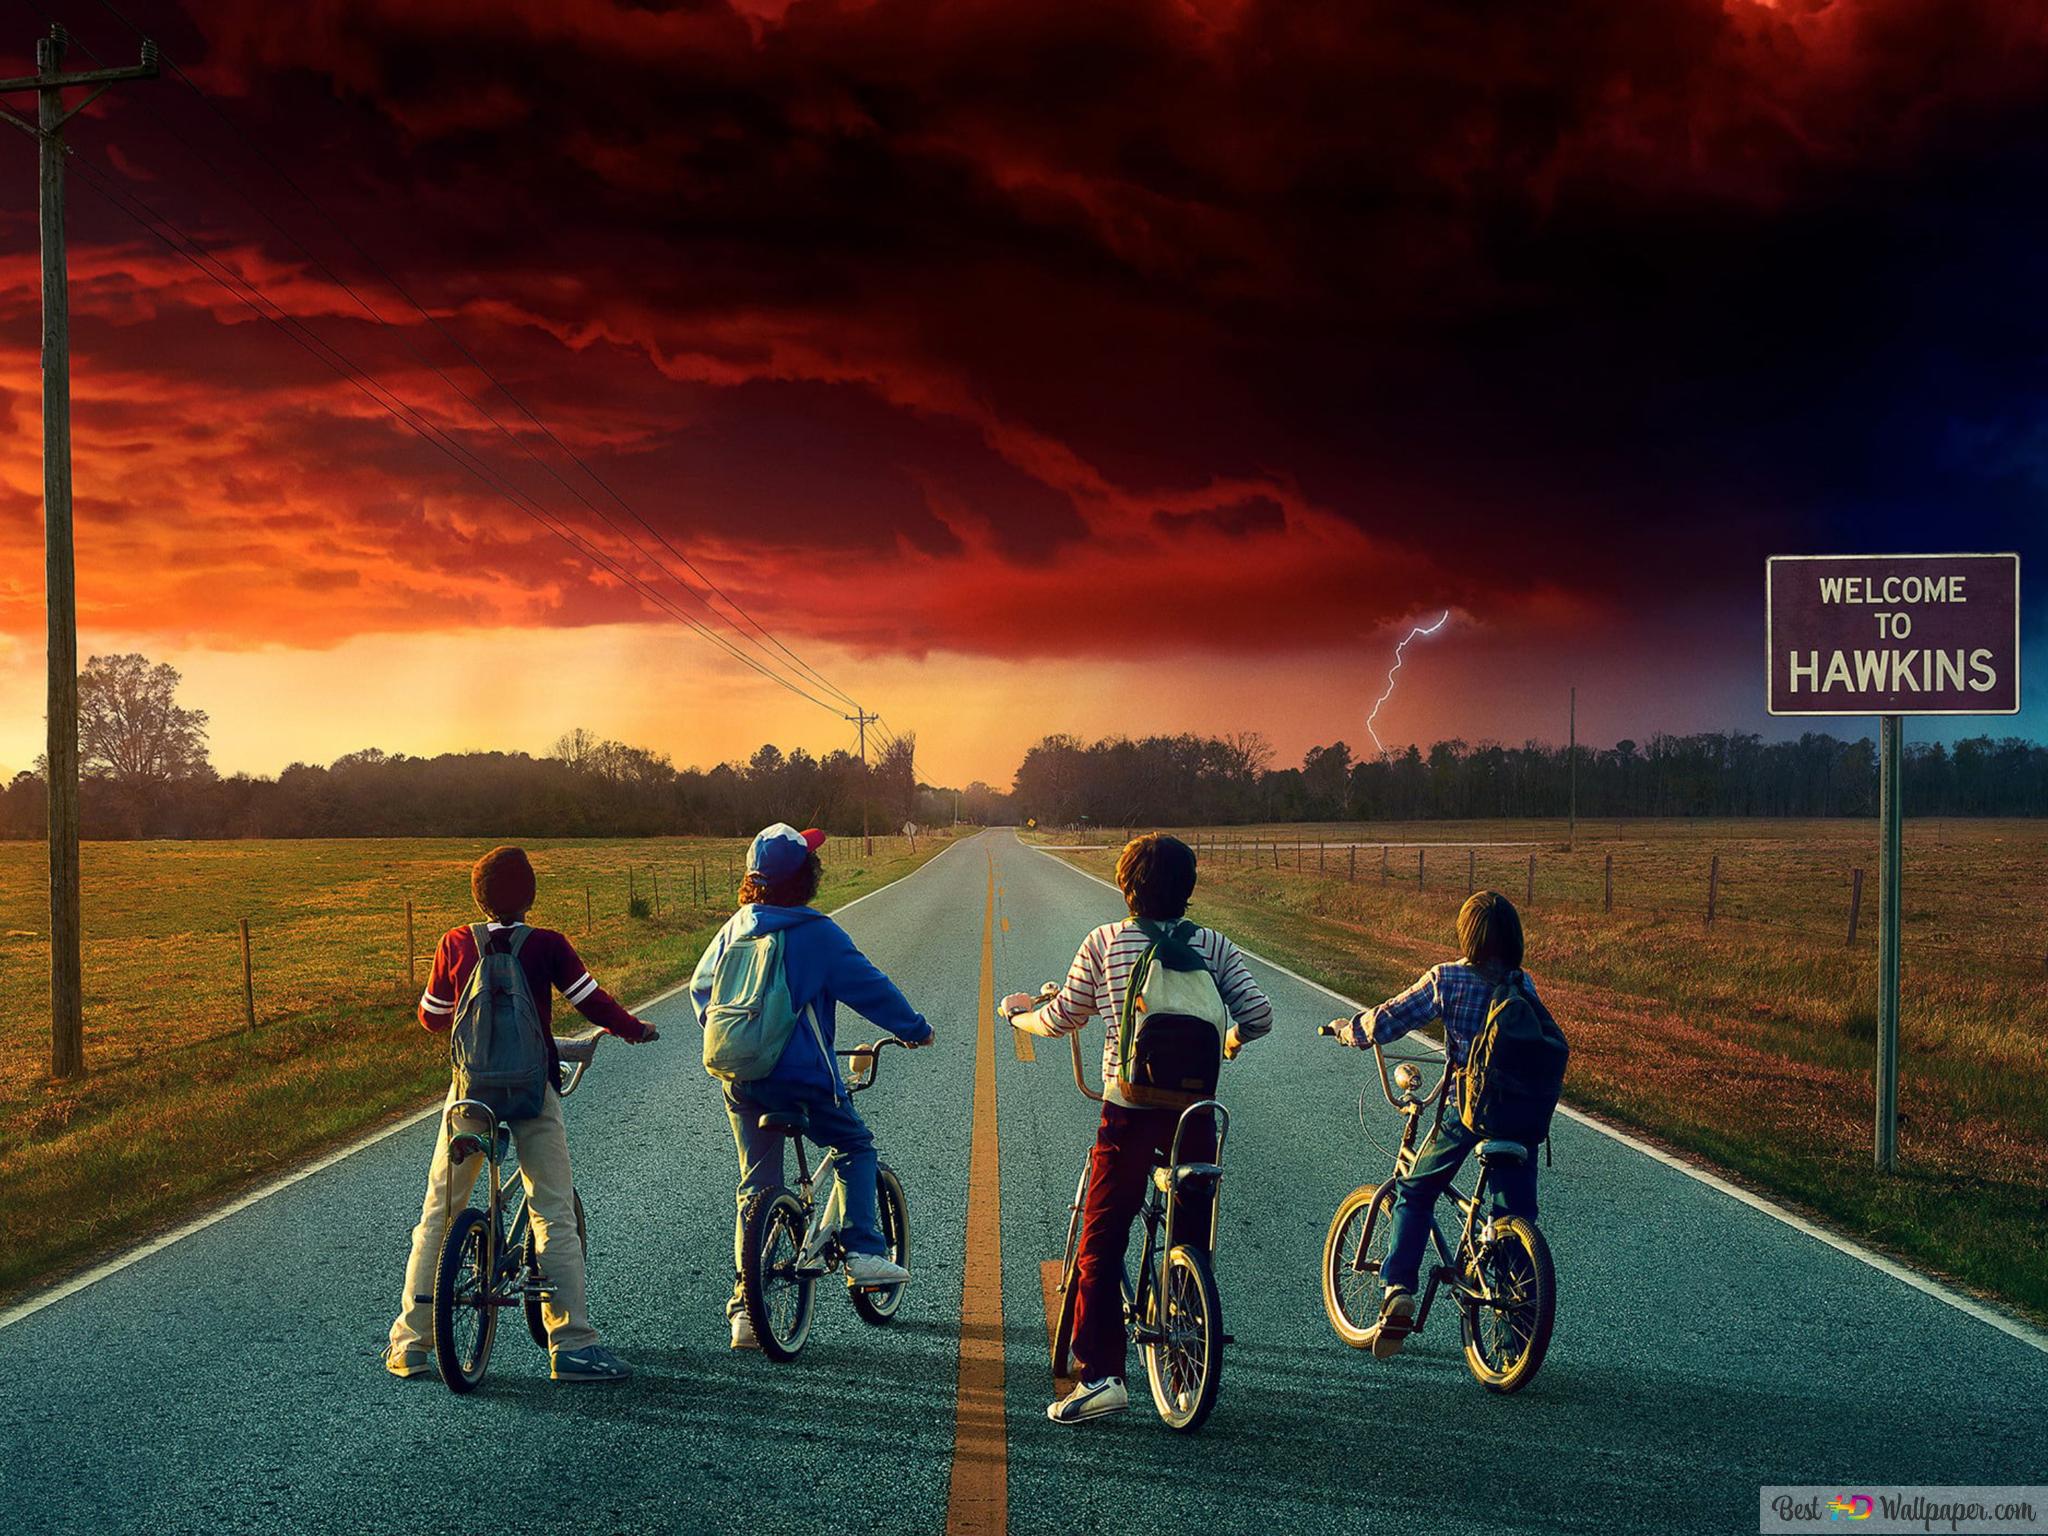 A group of people riding bikes on the road - Stranger Things